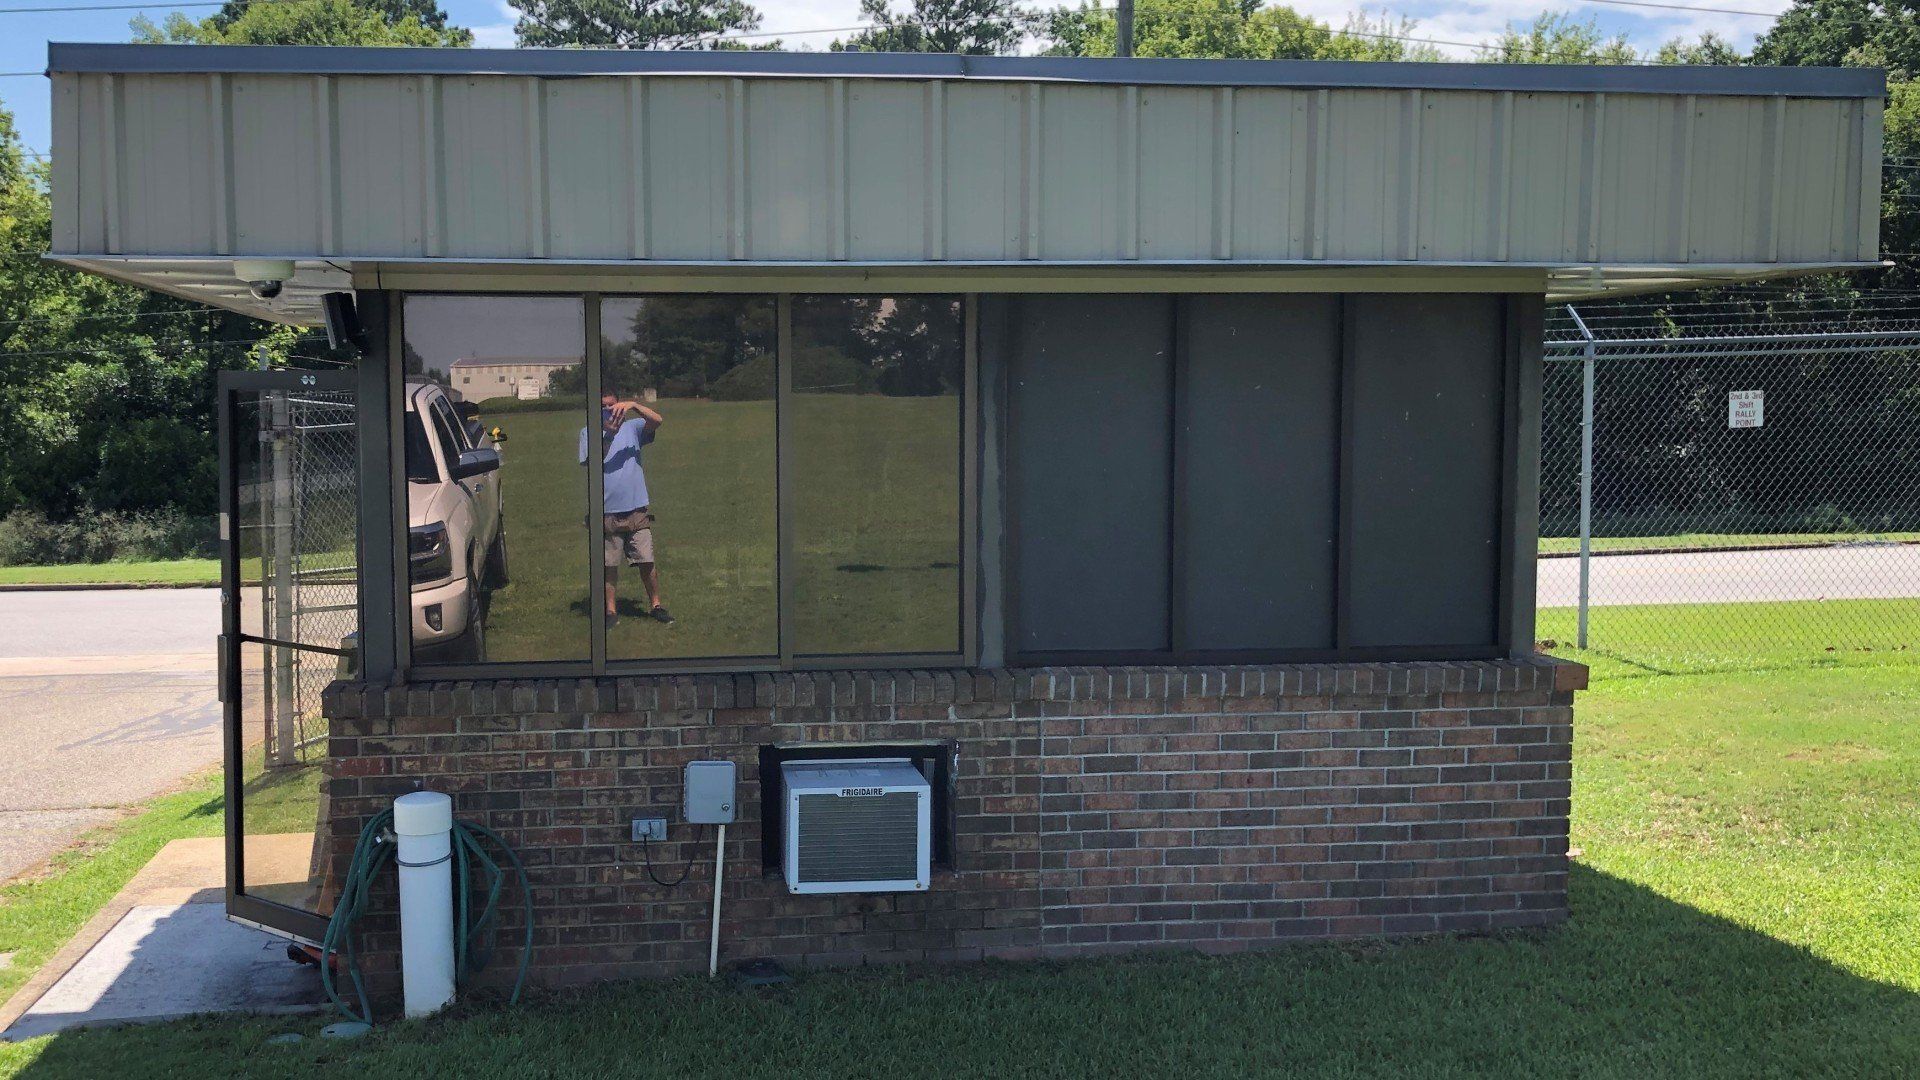 Business window tinting - Guard shack windows tinted on 6.27.2019 in Montgomery, AL